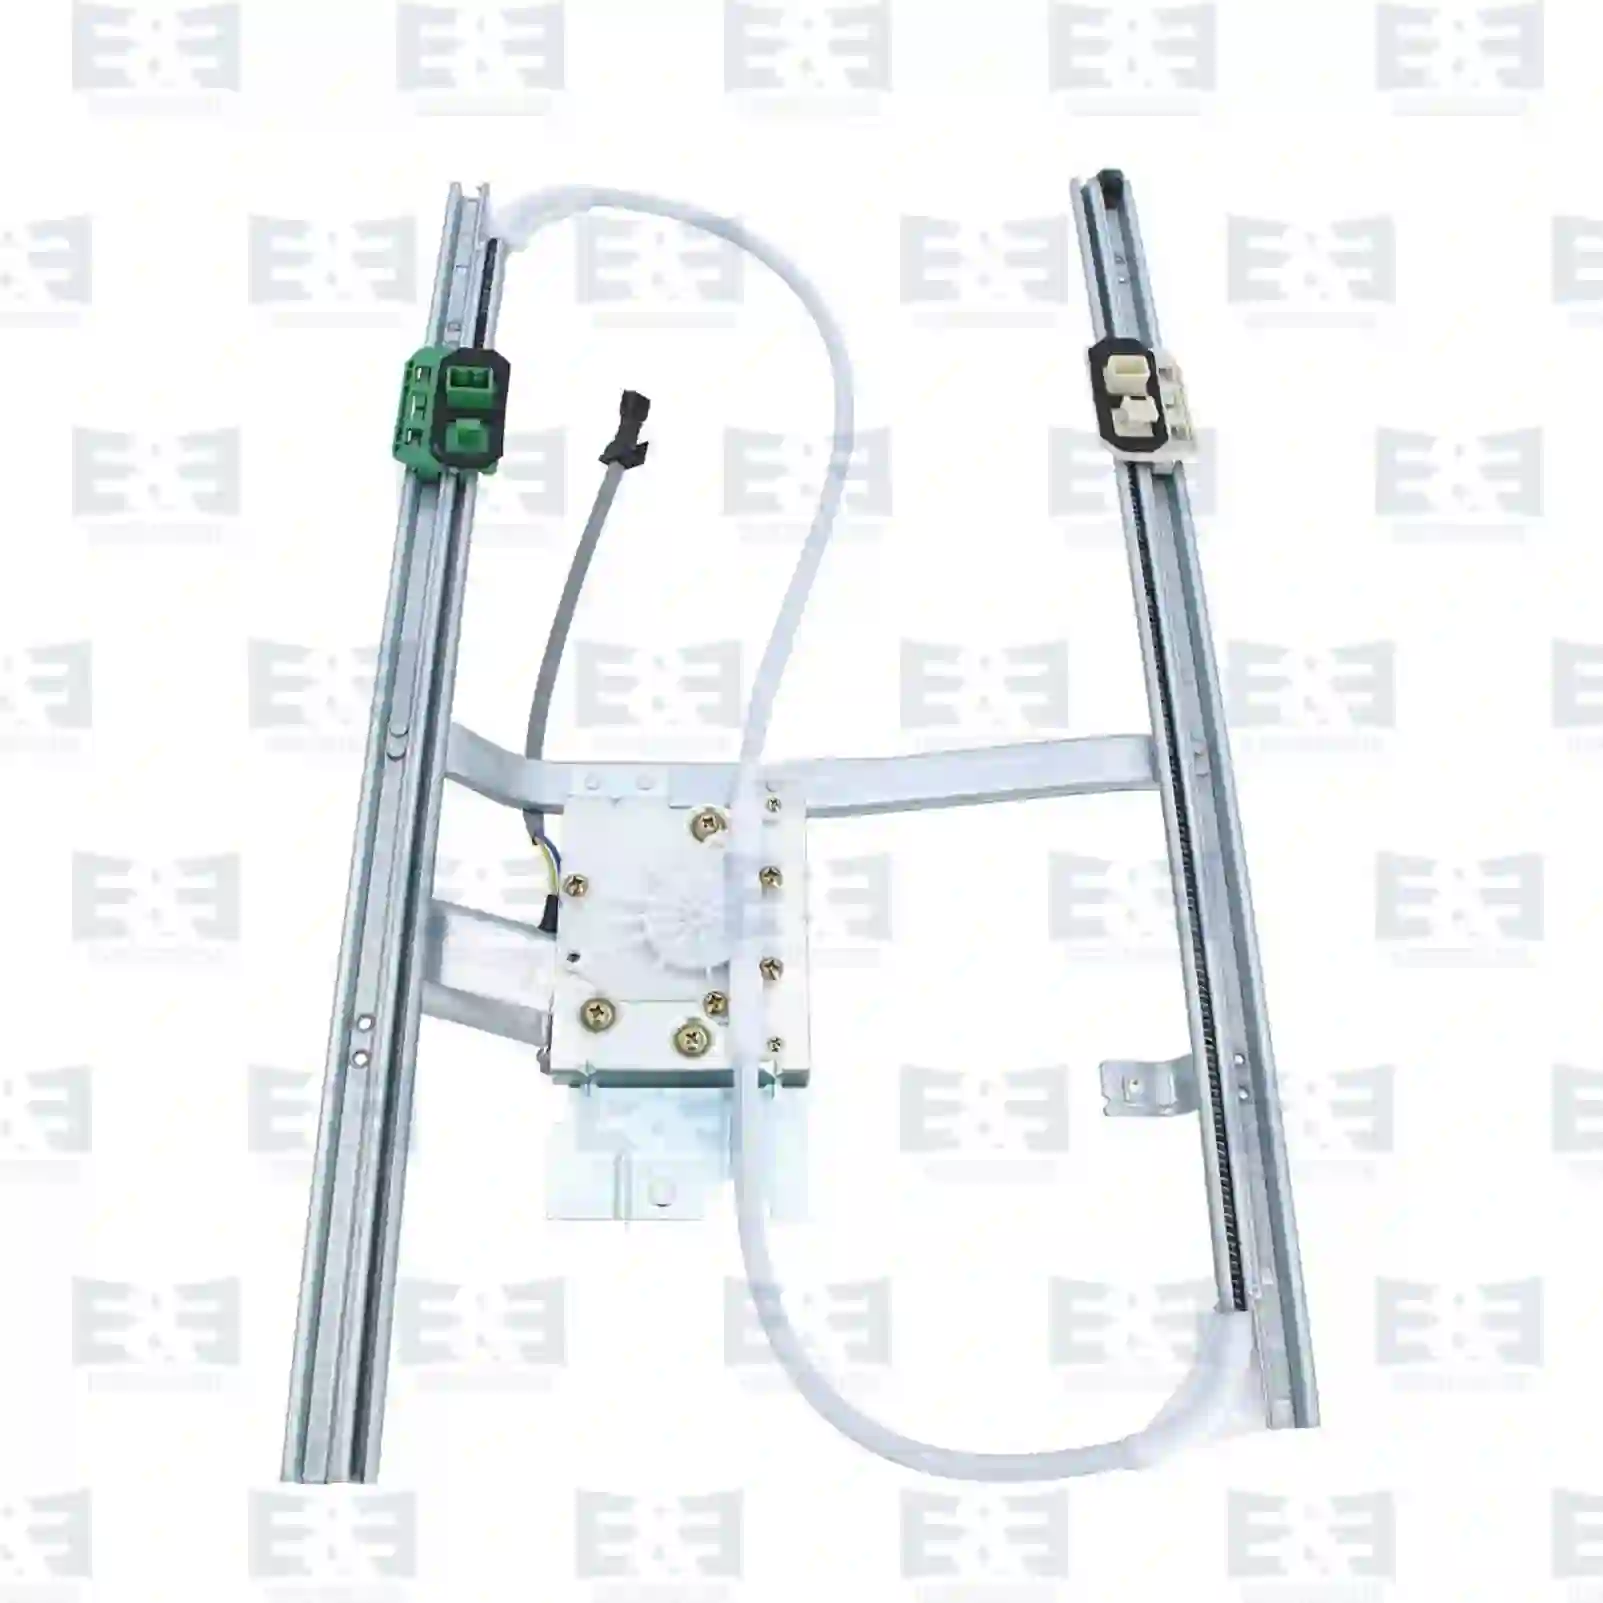  Window regulator, left, electrical, with motor || E&E Truck Spare Parts | Truck Spare Parts, Auotomotive Spare Parts